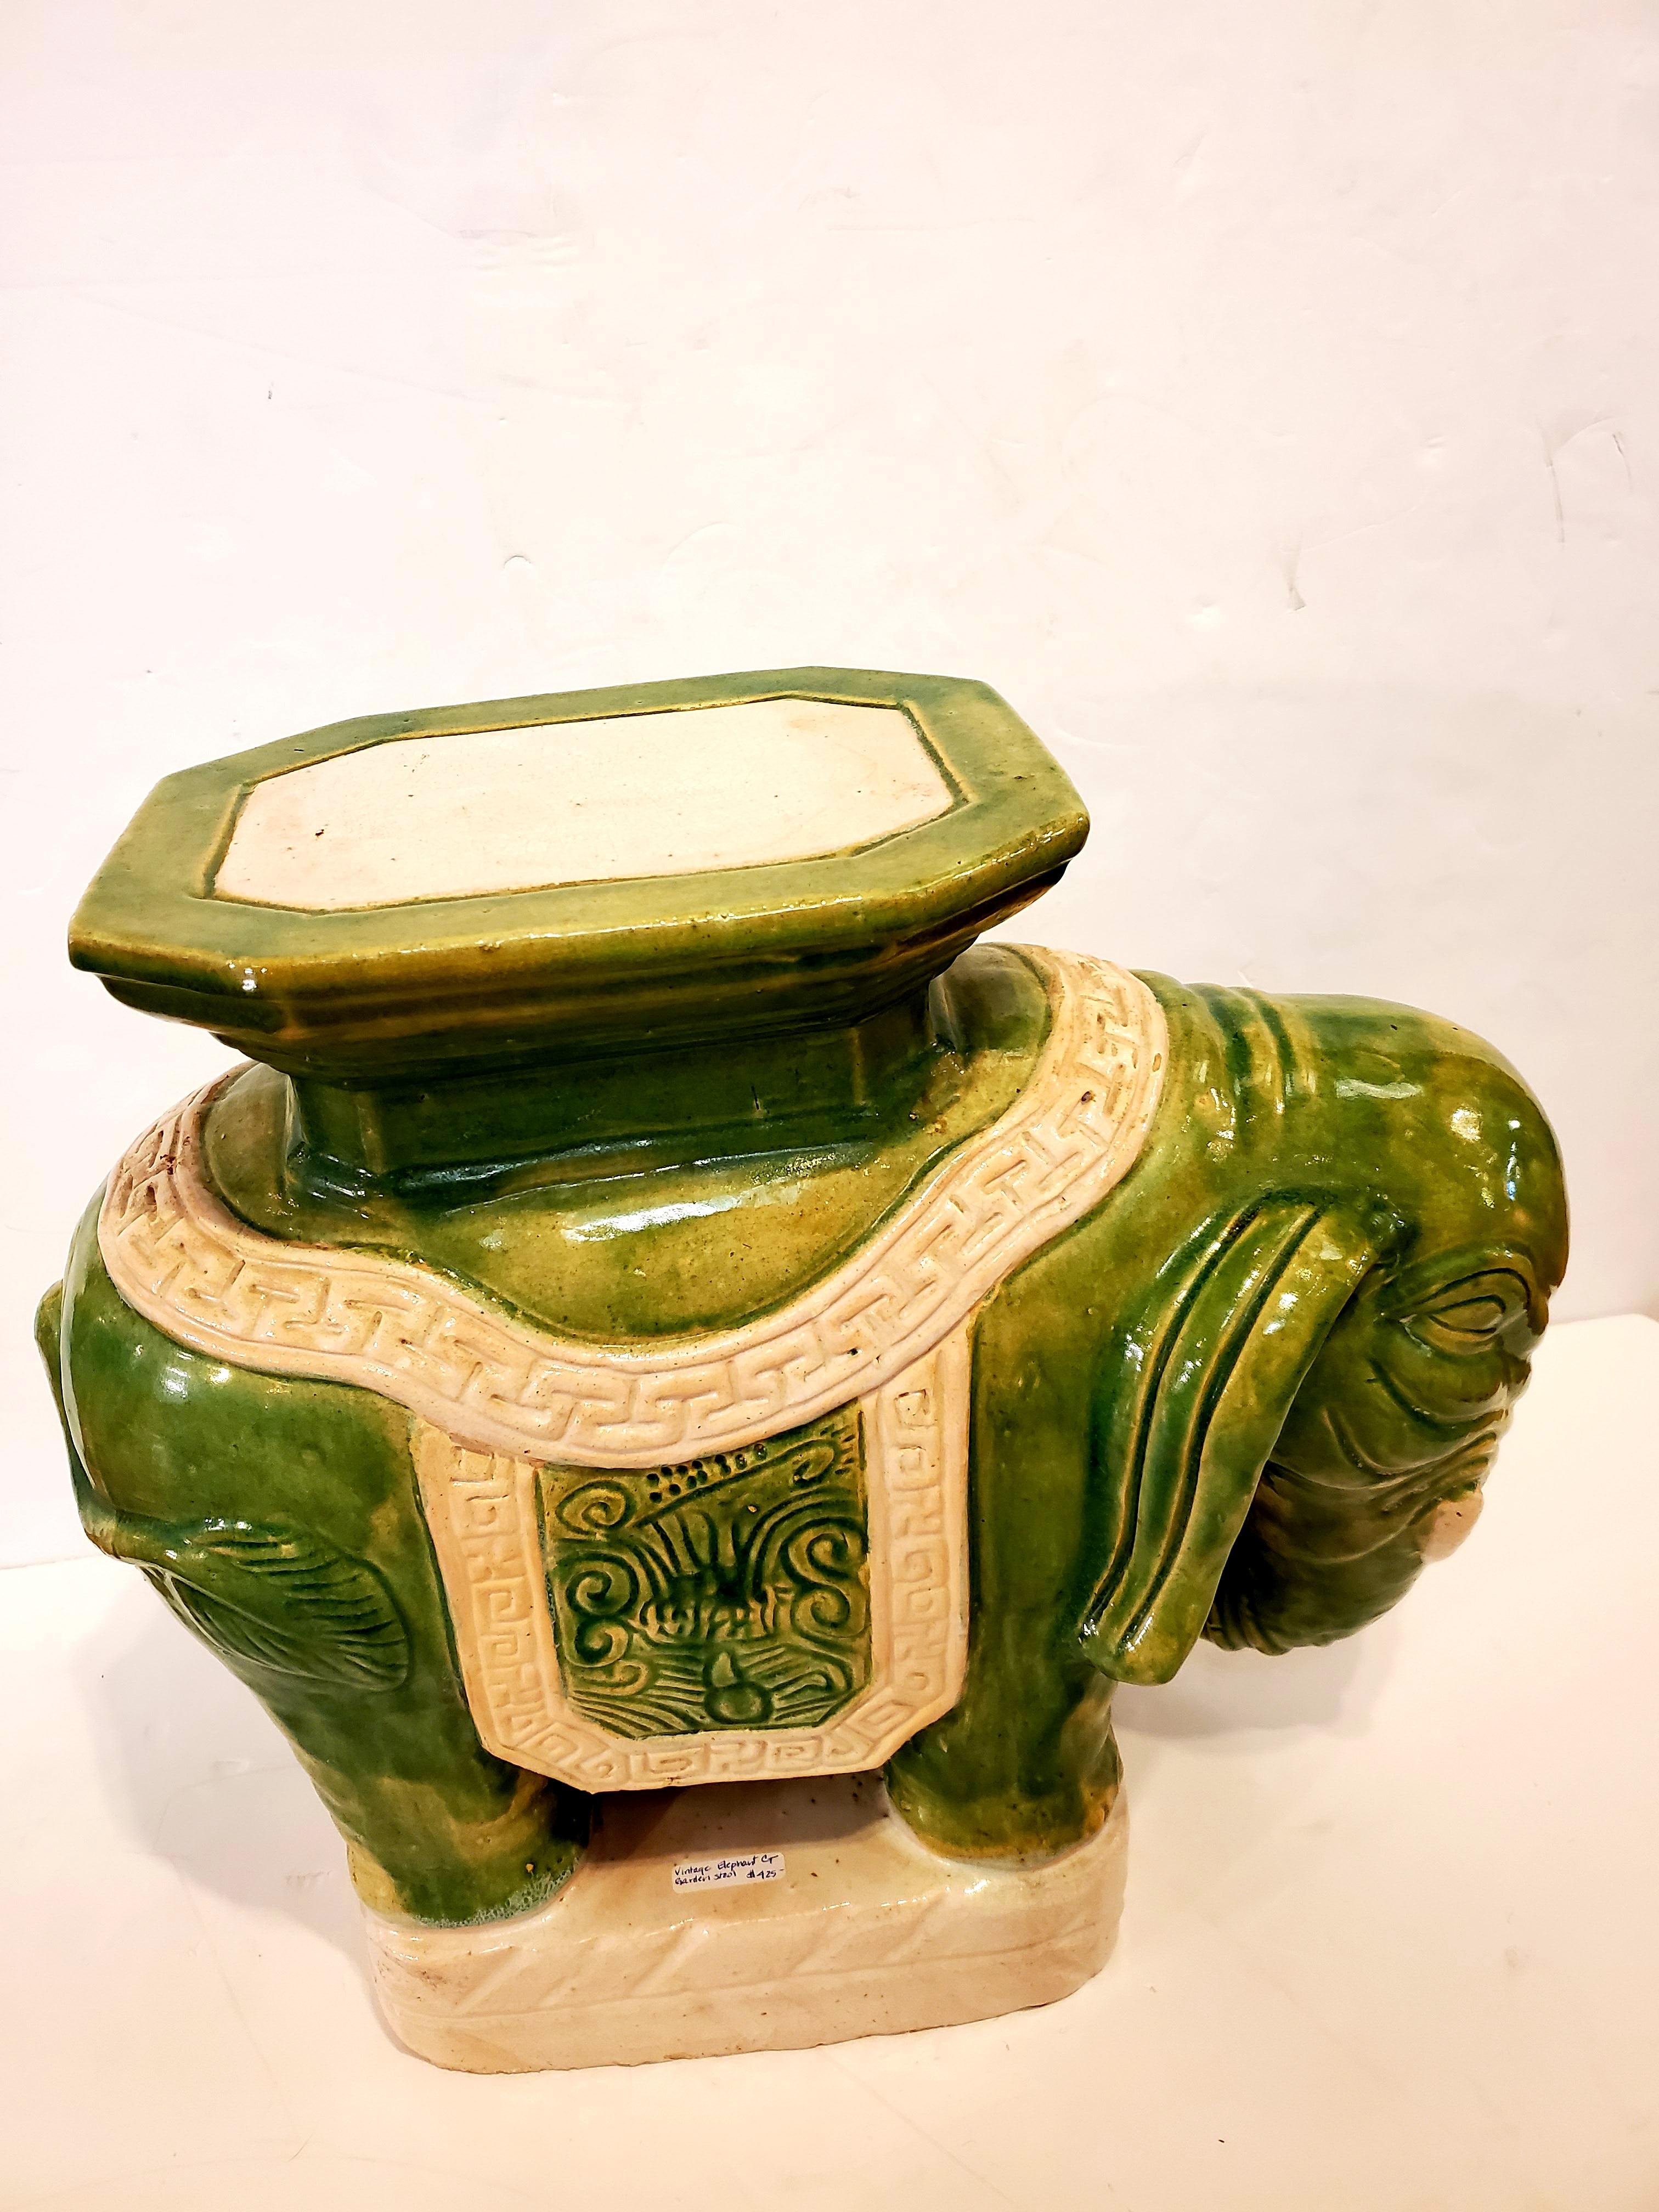 North American Charming Vintage Green & White Elephant Garden Seat End Table